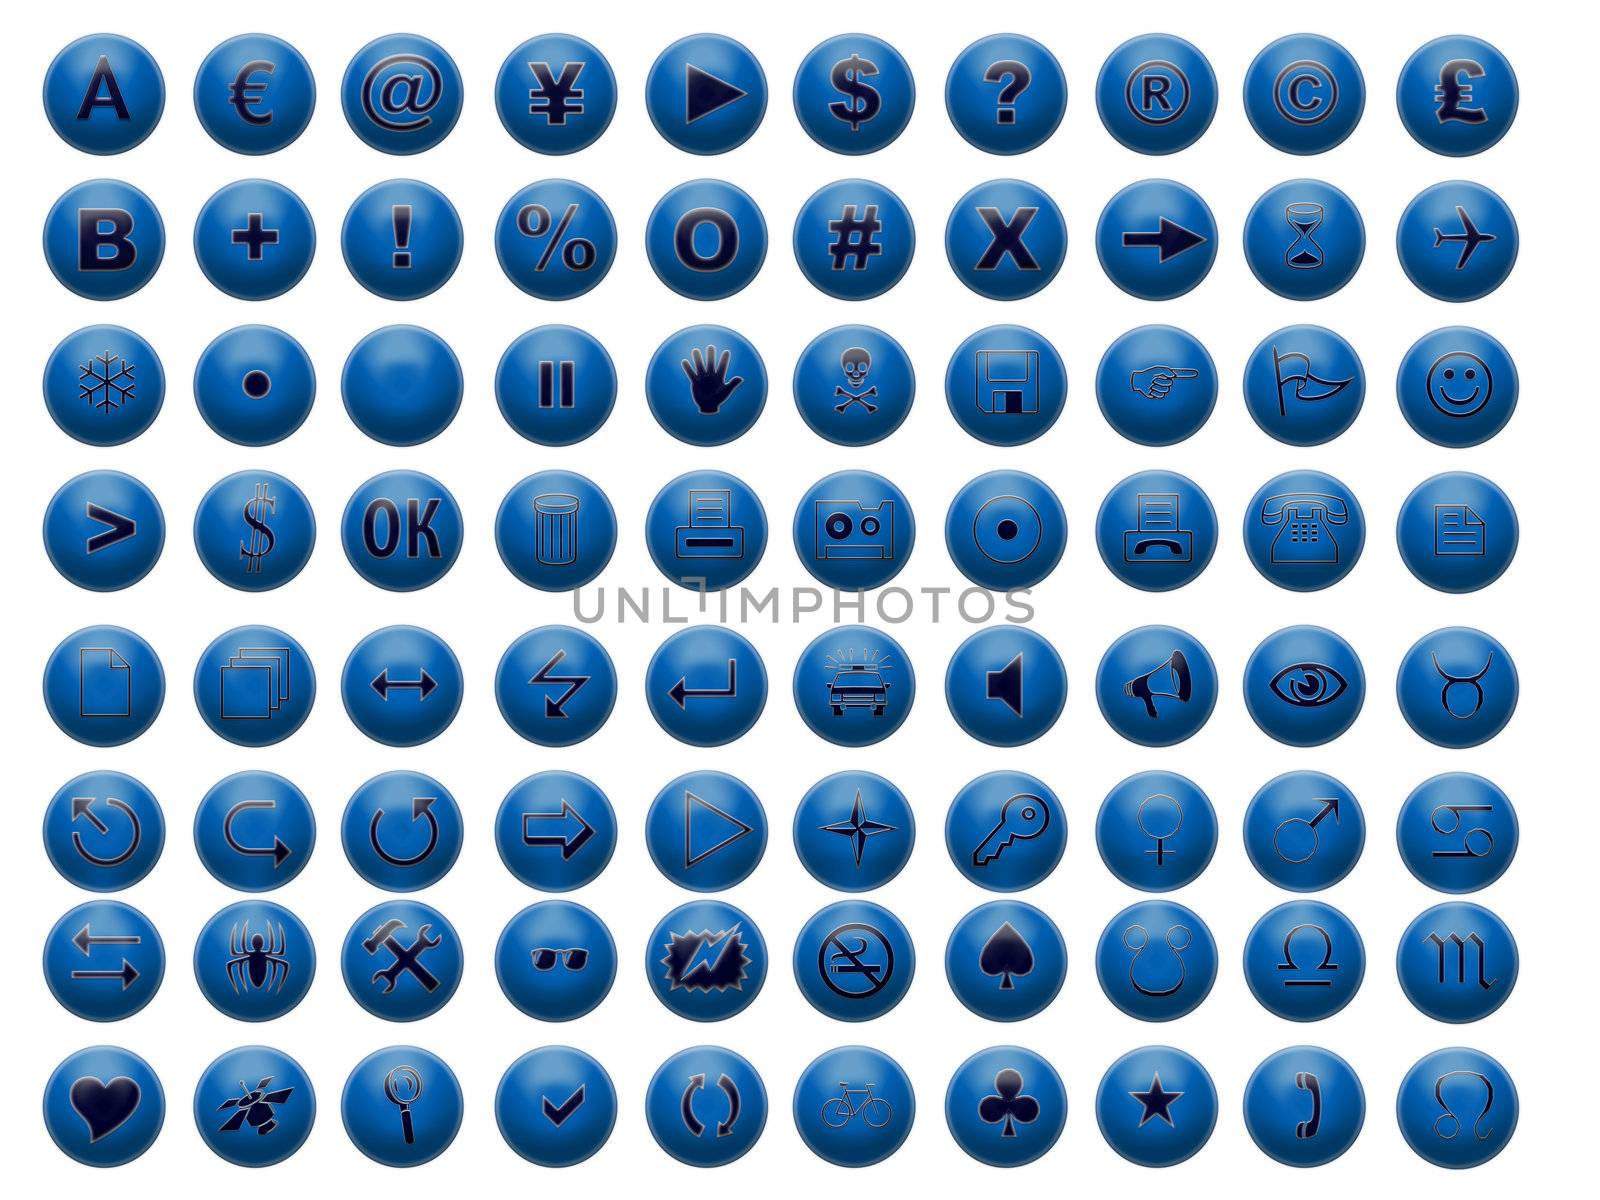  Buttons blue by karelindi